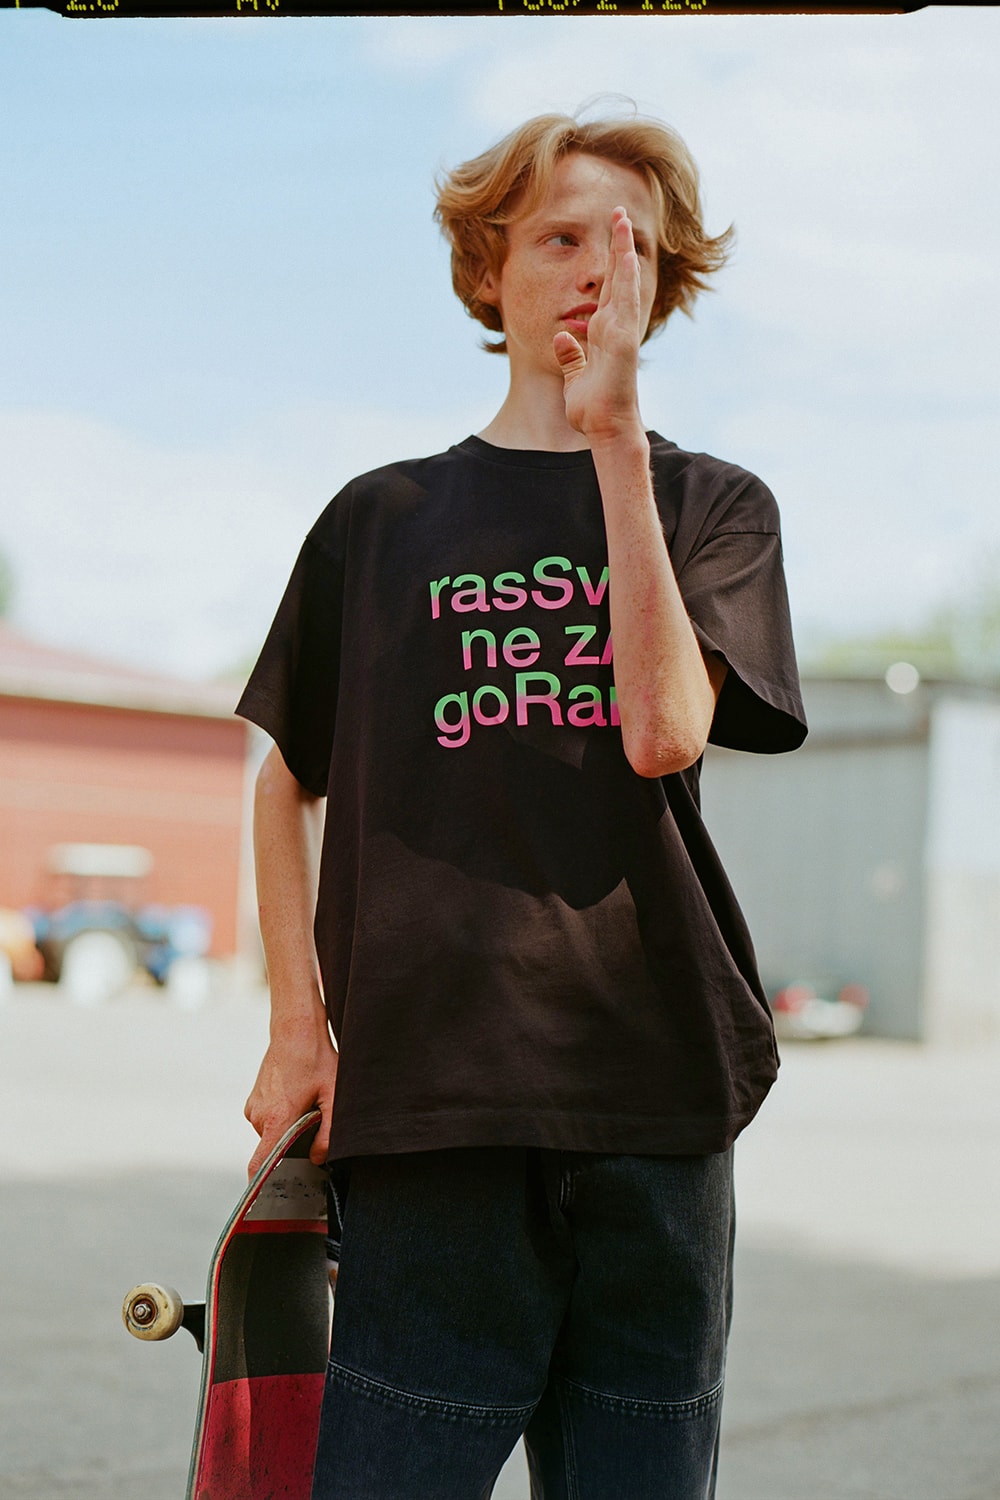 PACCBET Rassvet Winter 2018 Collection Gosha Rubchinskiy Moscow Skate Store Release Date For Sale Availbility